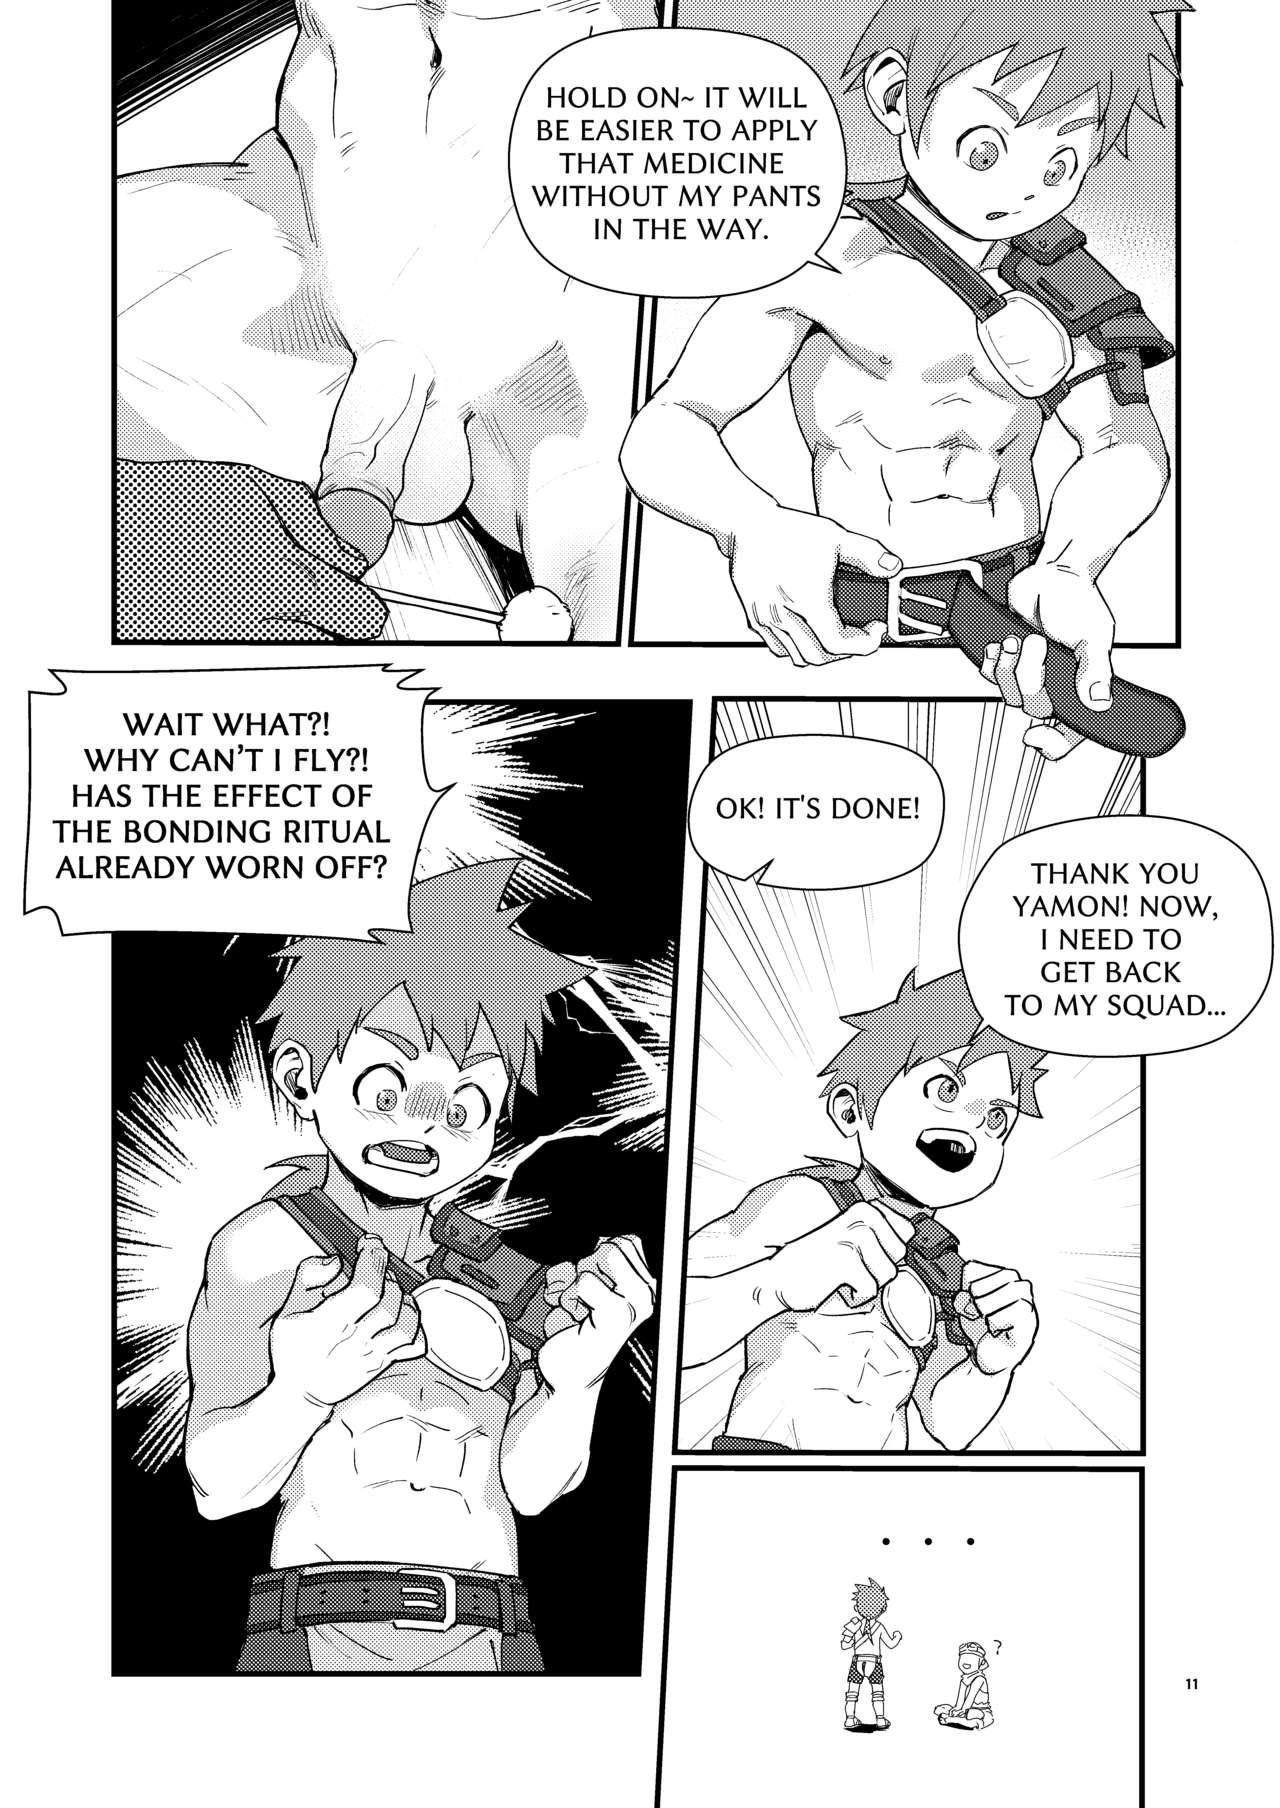 Chunky Above the Clouds - Original Italian - Page 11